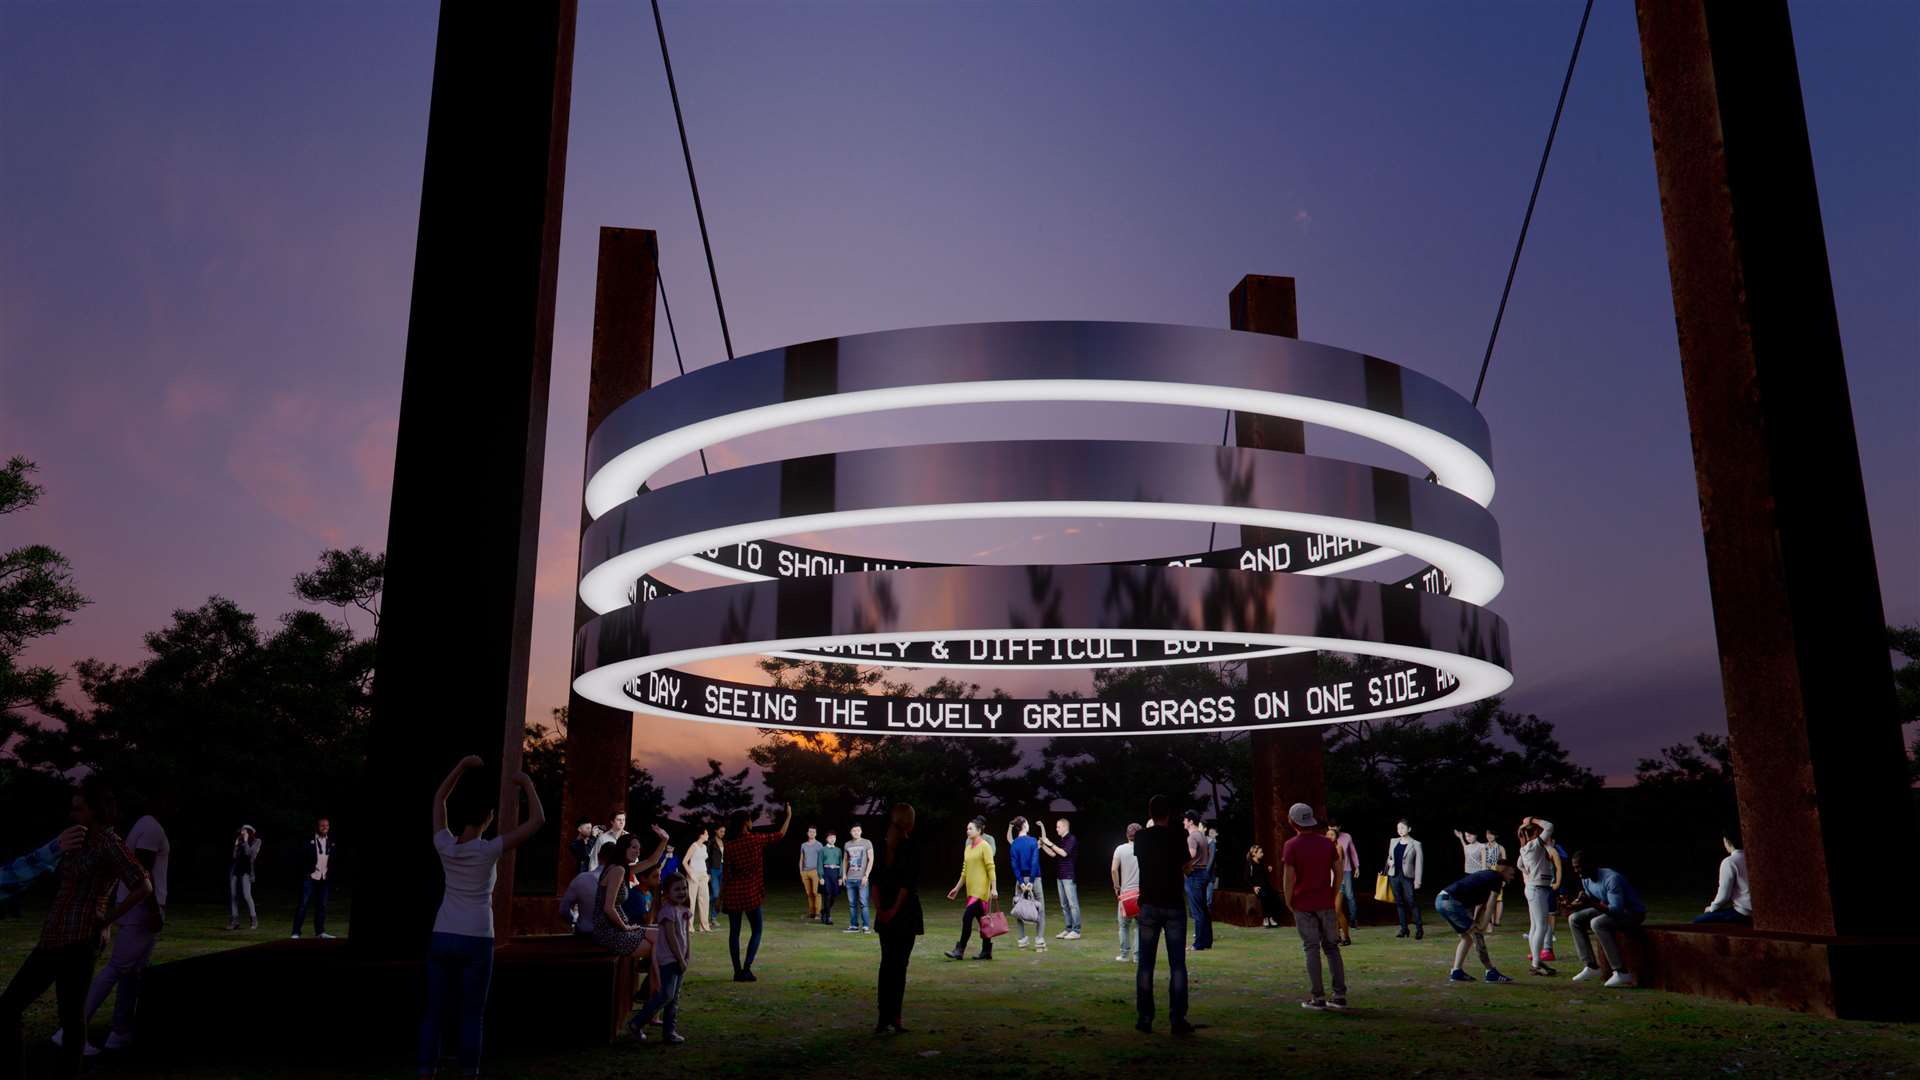 Visitors will be able to immerse themselves in the art structure. Picture: Lucid Creates